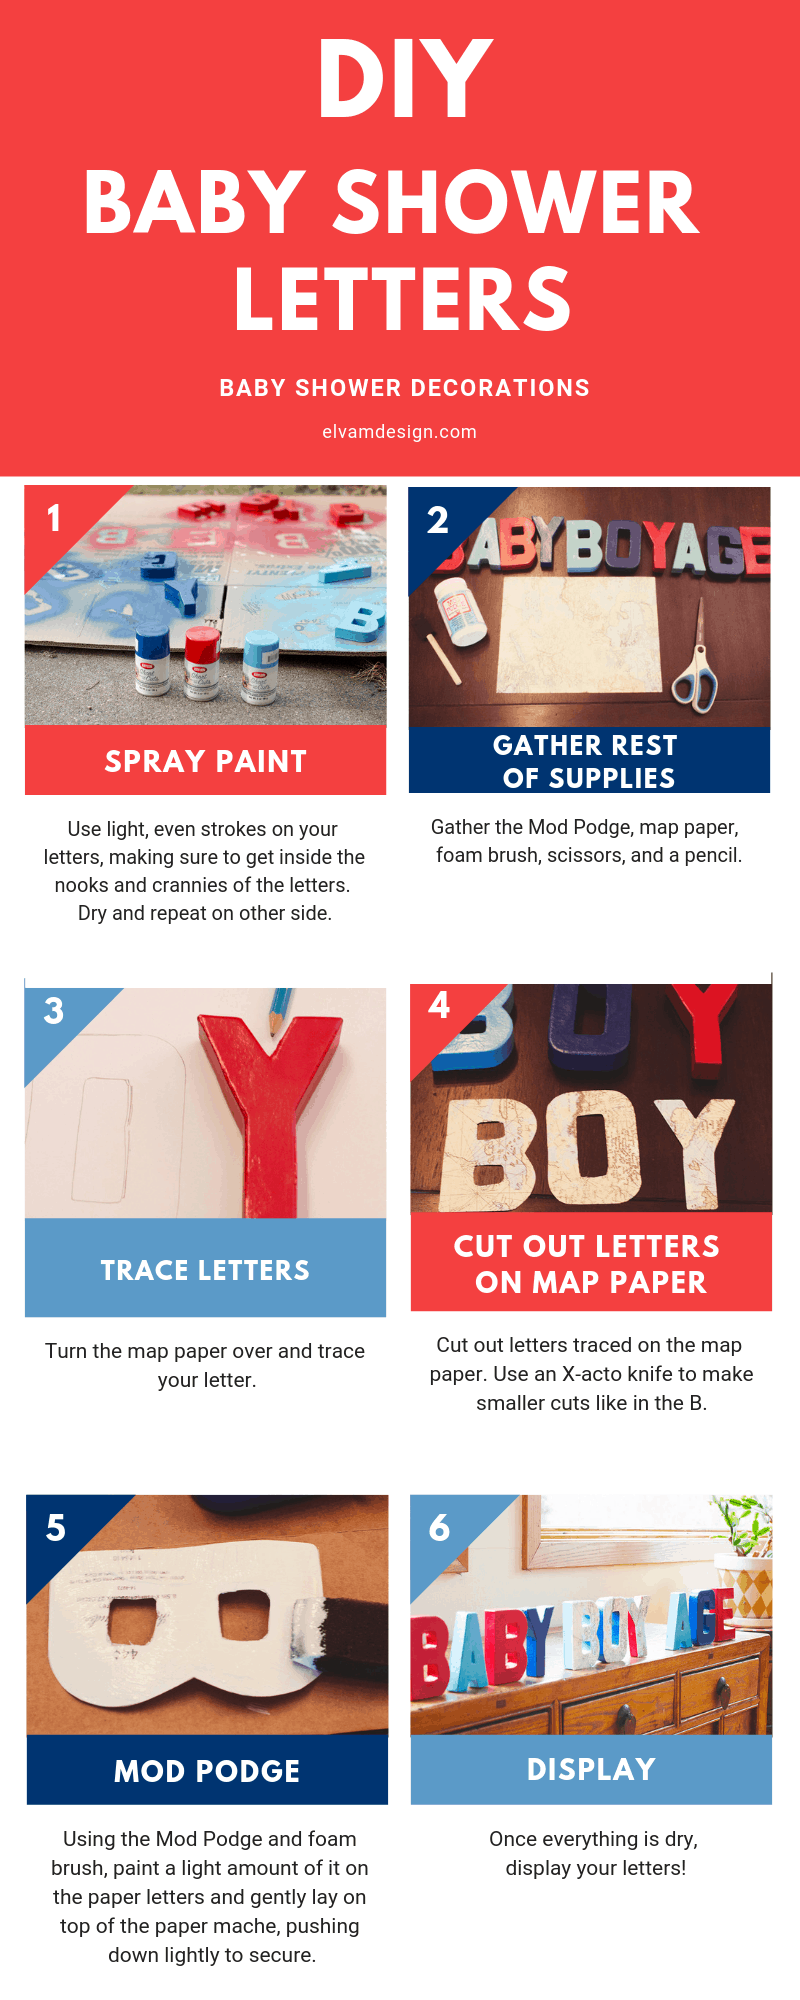 Follow the steps to create these DIY Baby Shower Letters